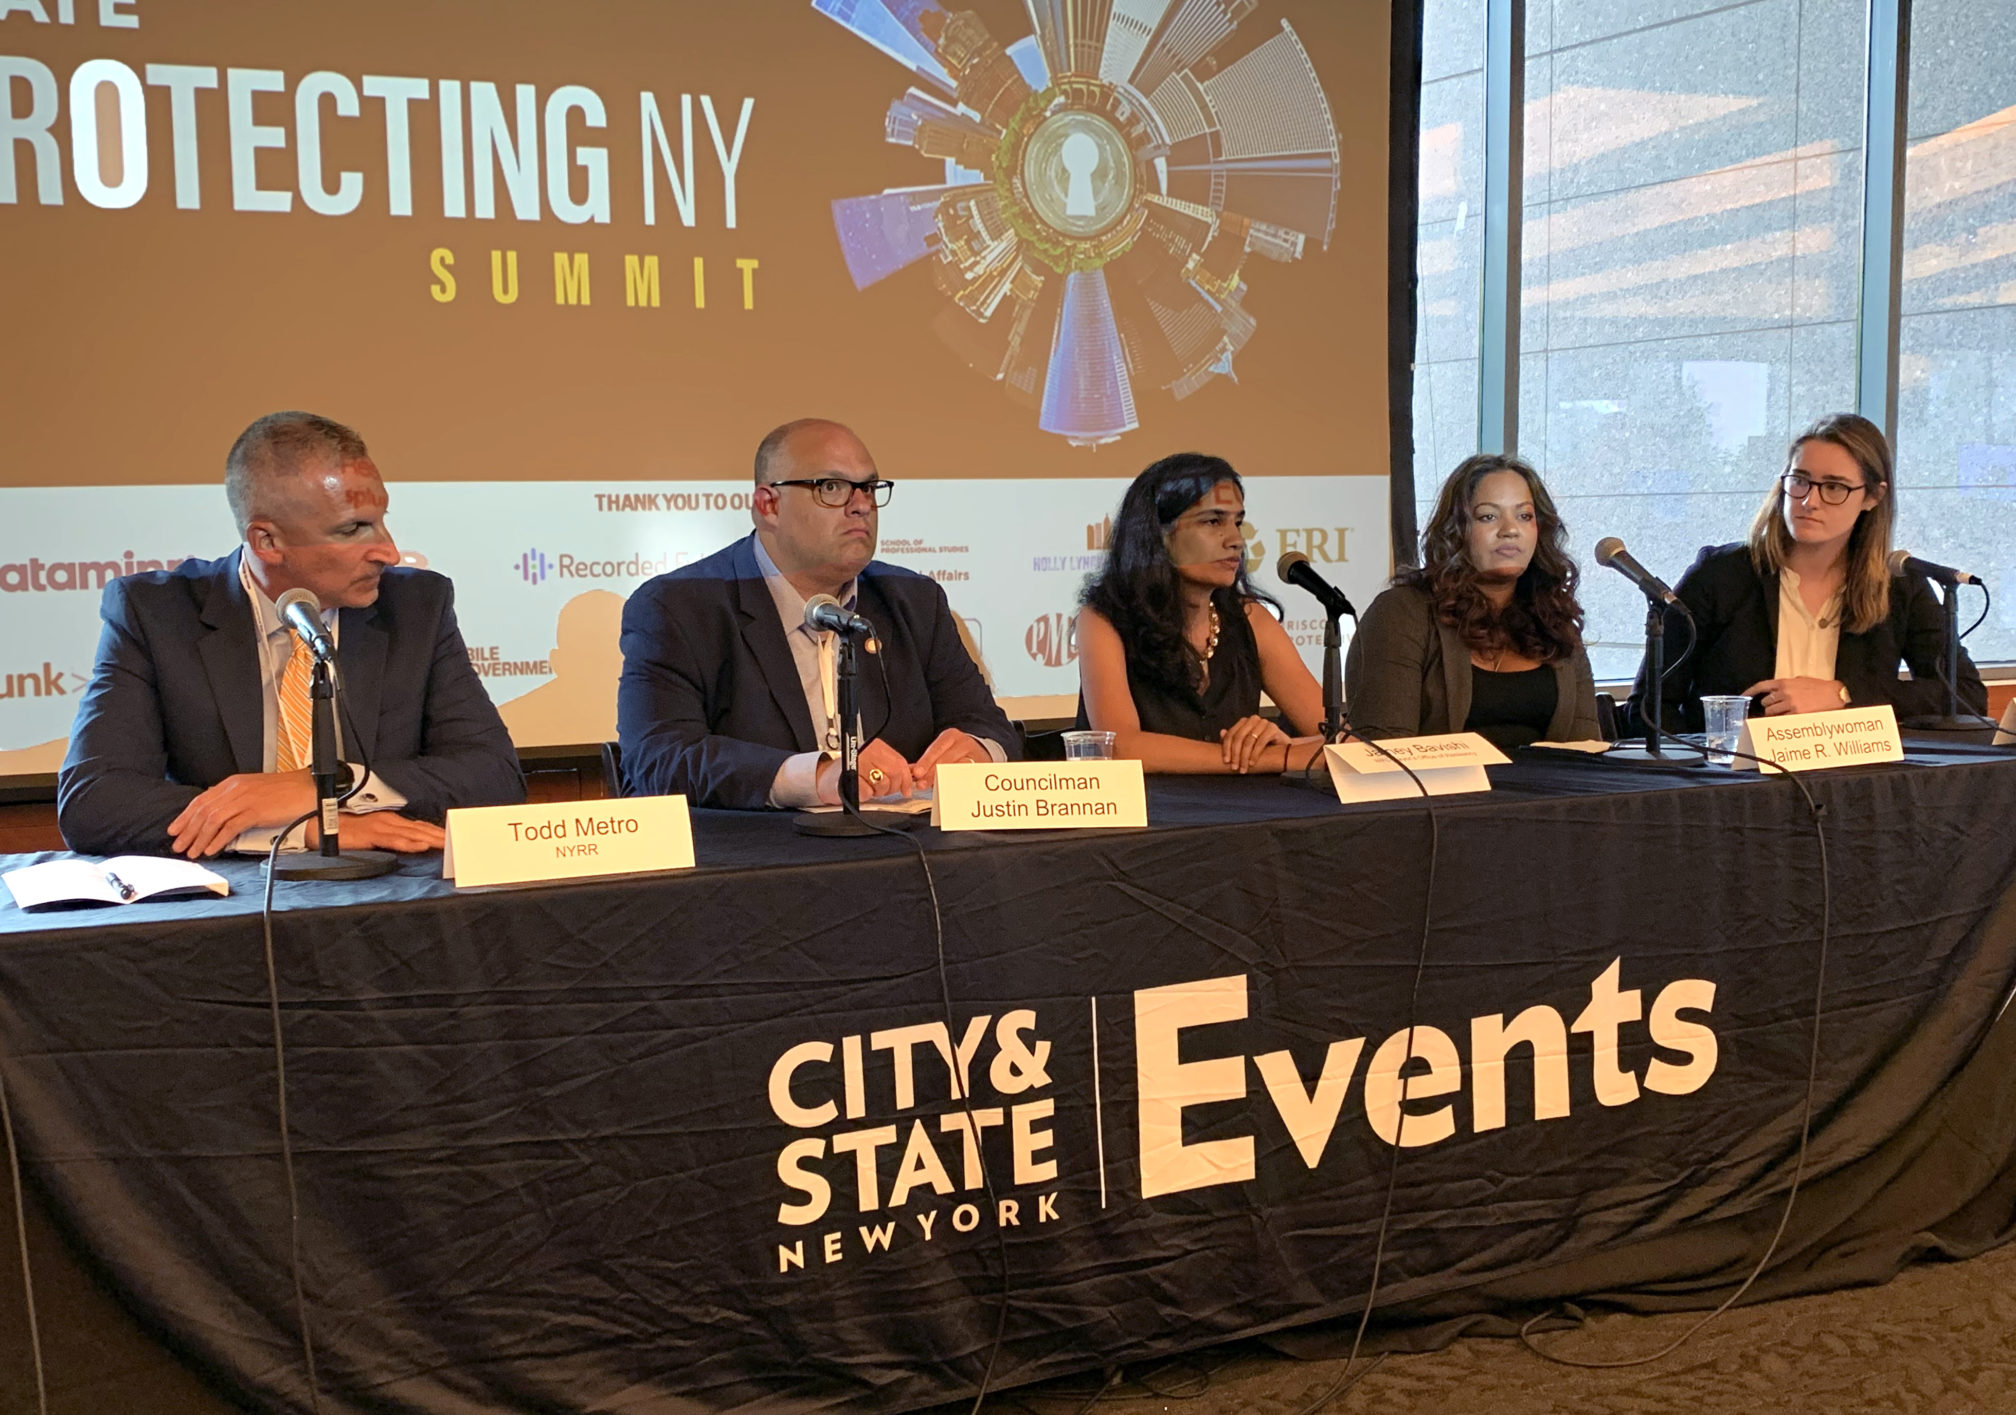 The Disaster Management and Prevention panel at Wednesday’s Protecting NY Summit. Members included (from left) Todd Metro, Councilmember Justin Brannan, Jainey Bavishi, Assemblymember Jaime Williams and moderator Annie McDonough. Eagle photo by Mary Frost